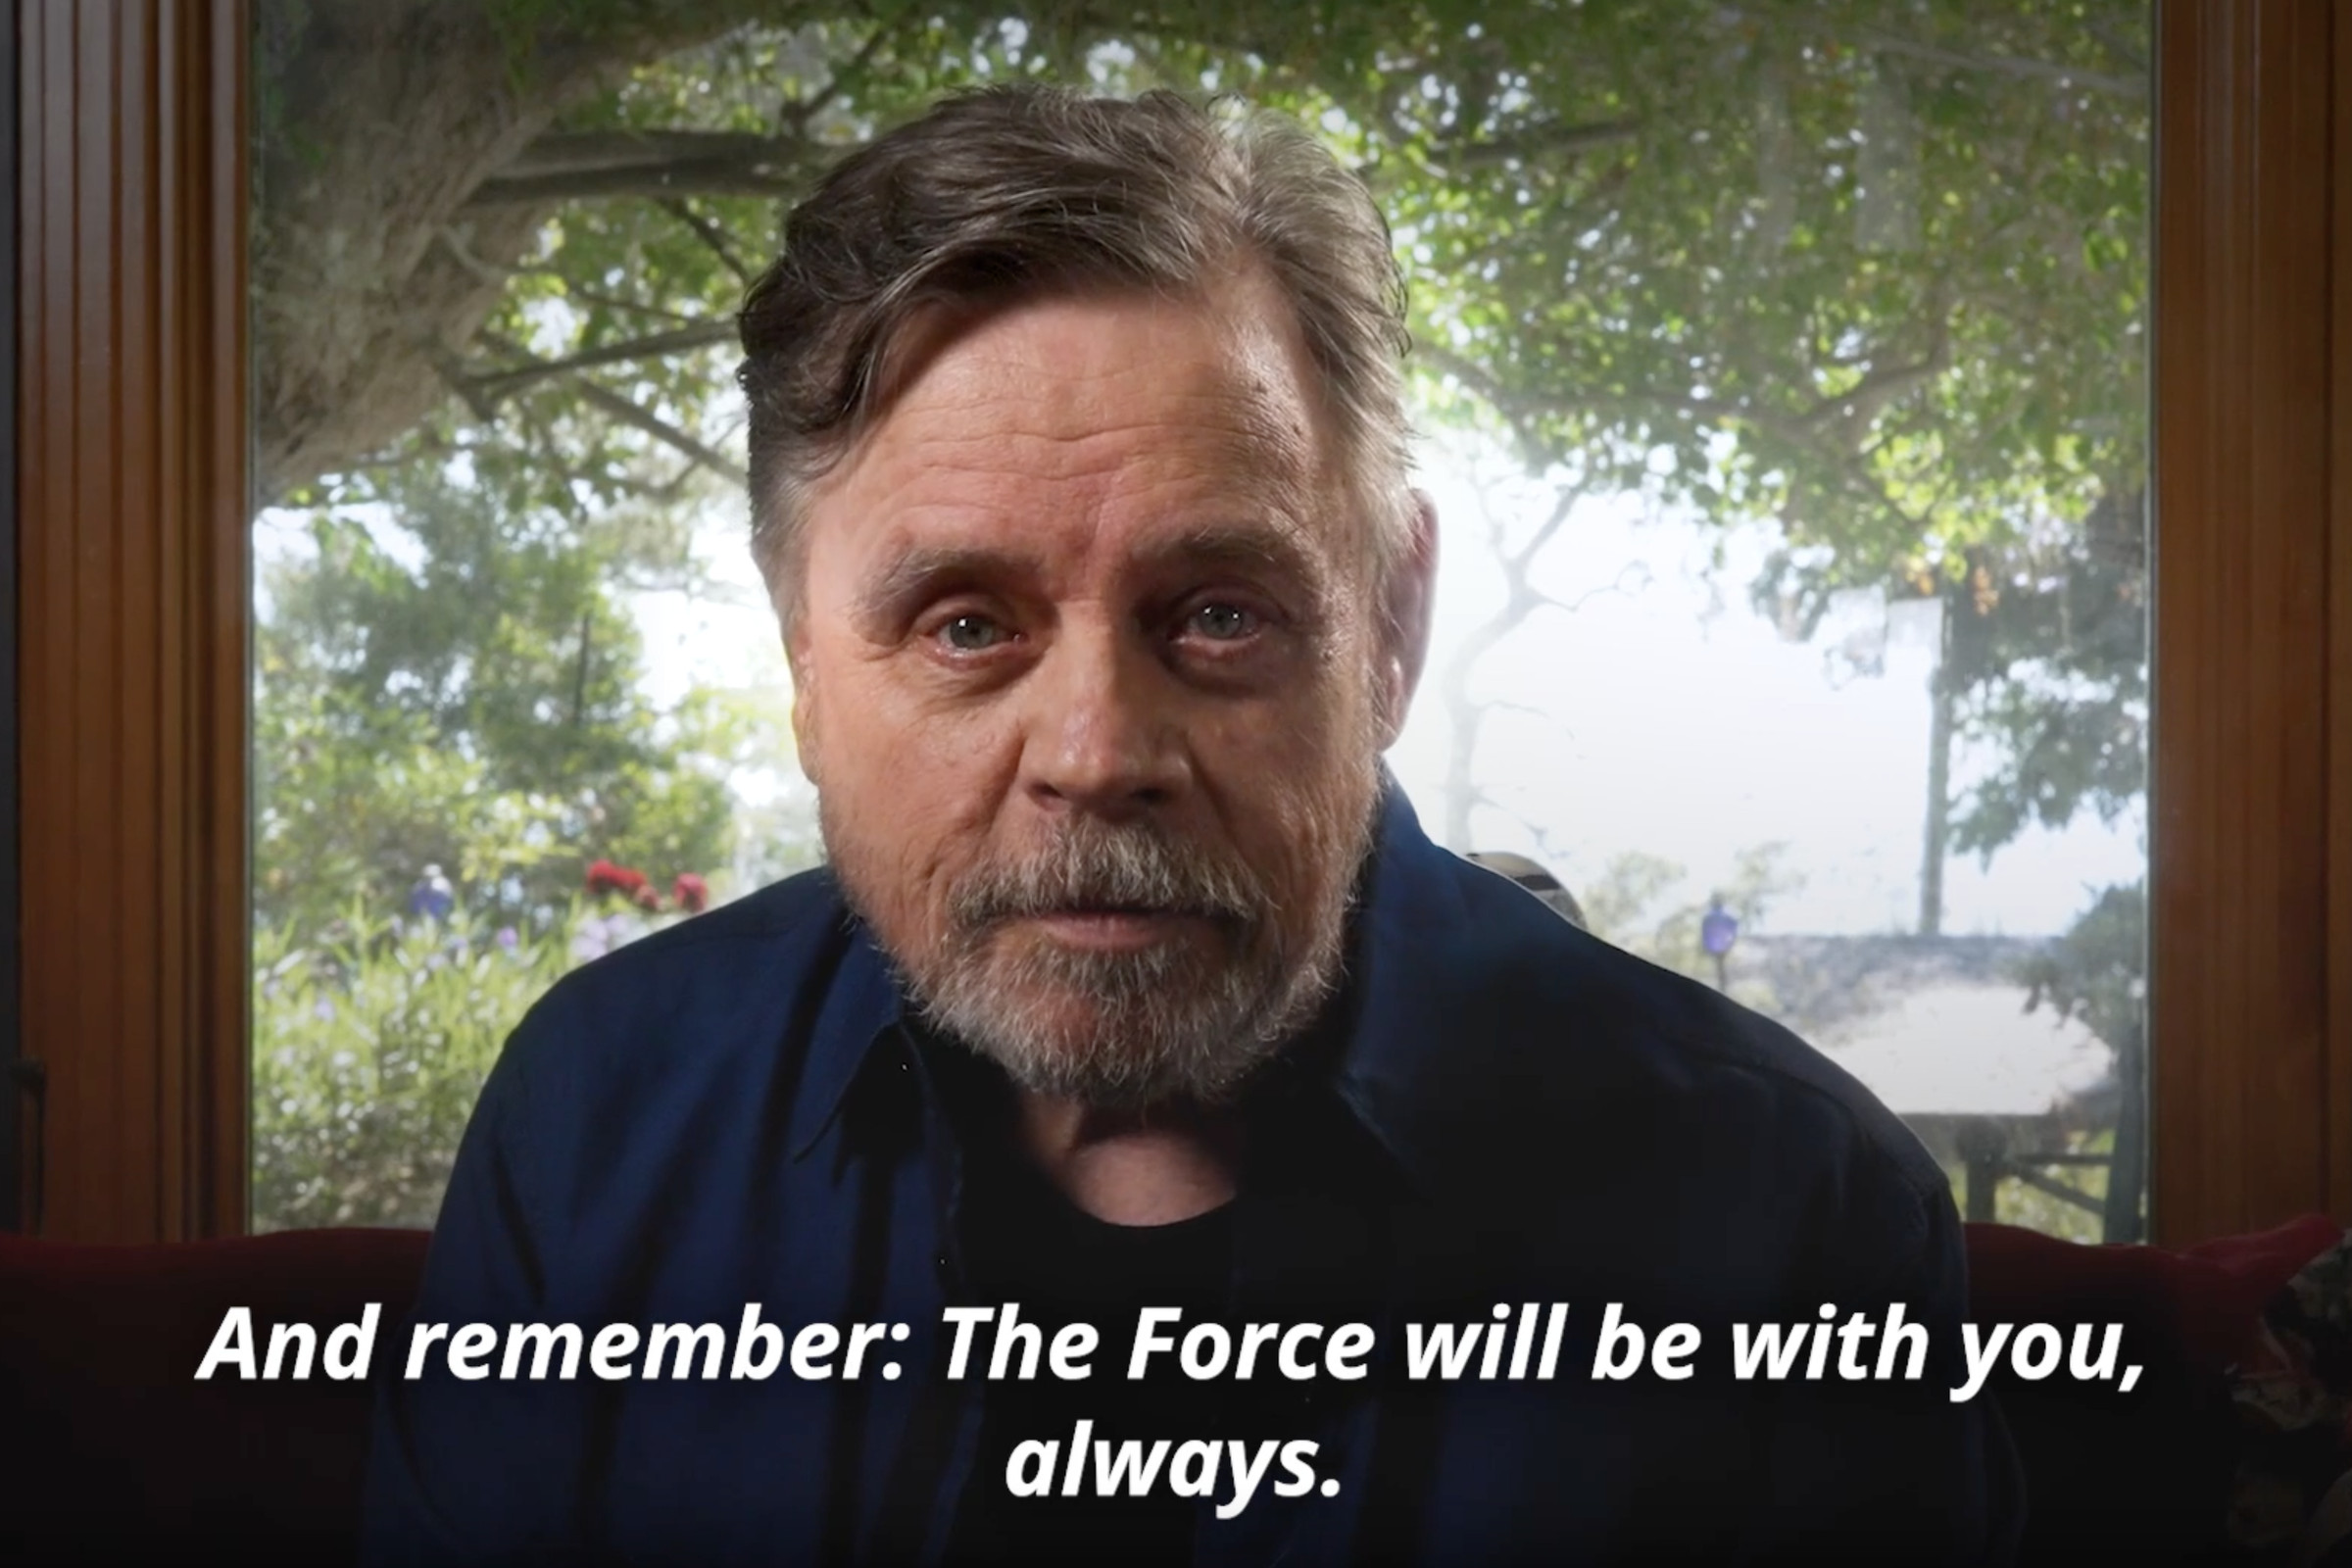 Mark Hamill in a screenshot from the State Department video series on space